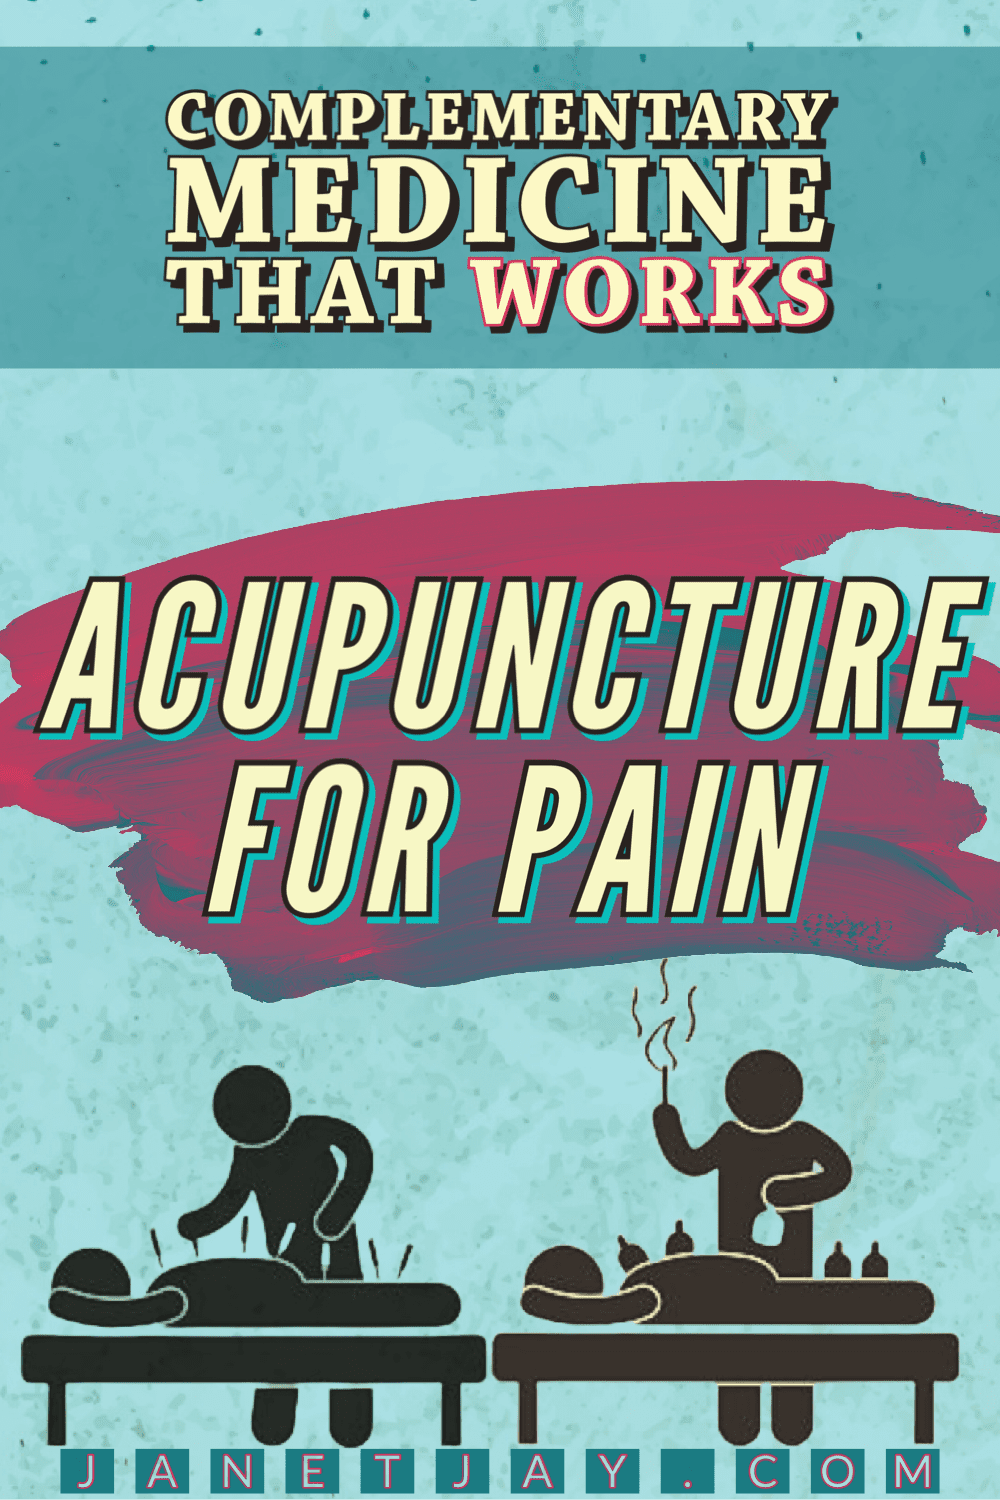 two stick figures are demonstrating acupuncture and cupping, text reads "complementary medicine that works: acupuncture for pain,  janetjay.com"